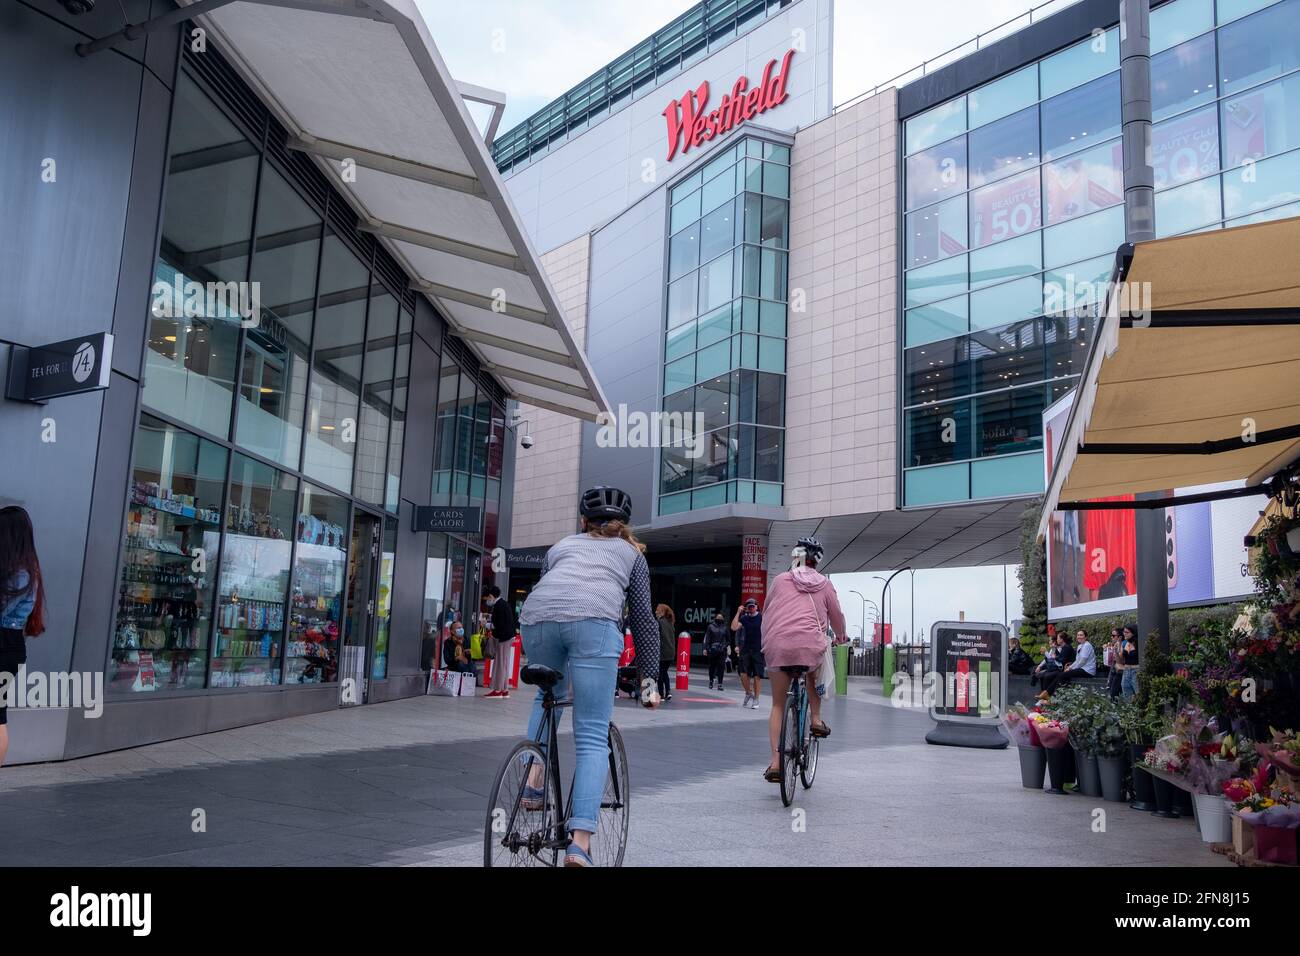 London- April, 2021: Westfield Shopping Centre in Shepherds Bush. Large scale indoor retail centre with many high street and luxury chains. Stock Photo